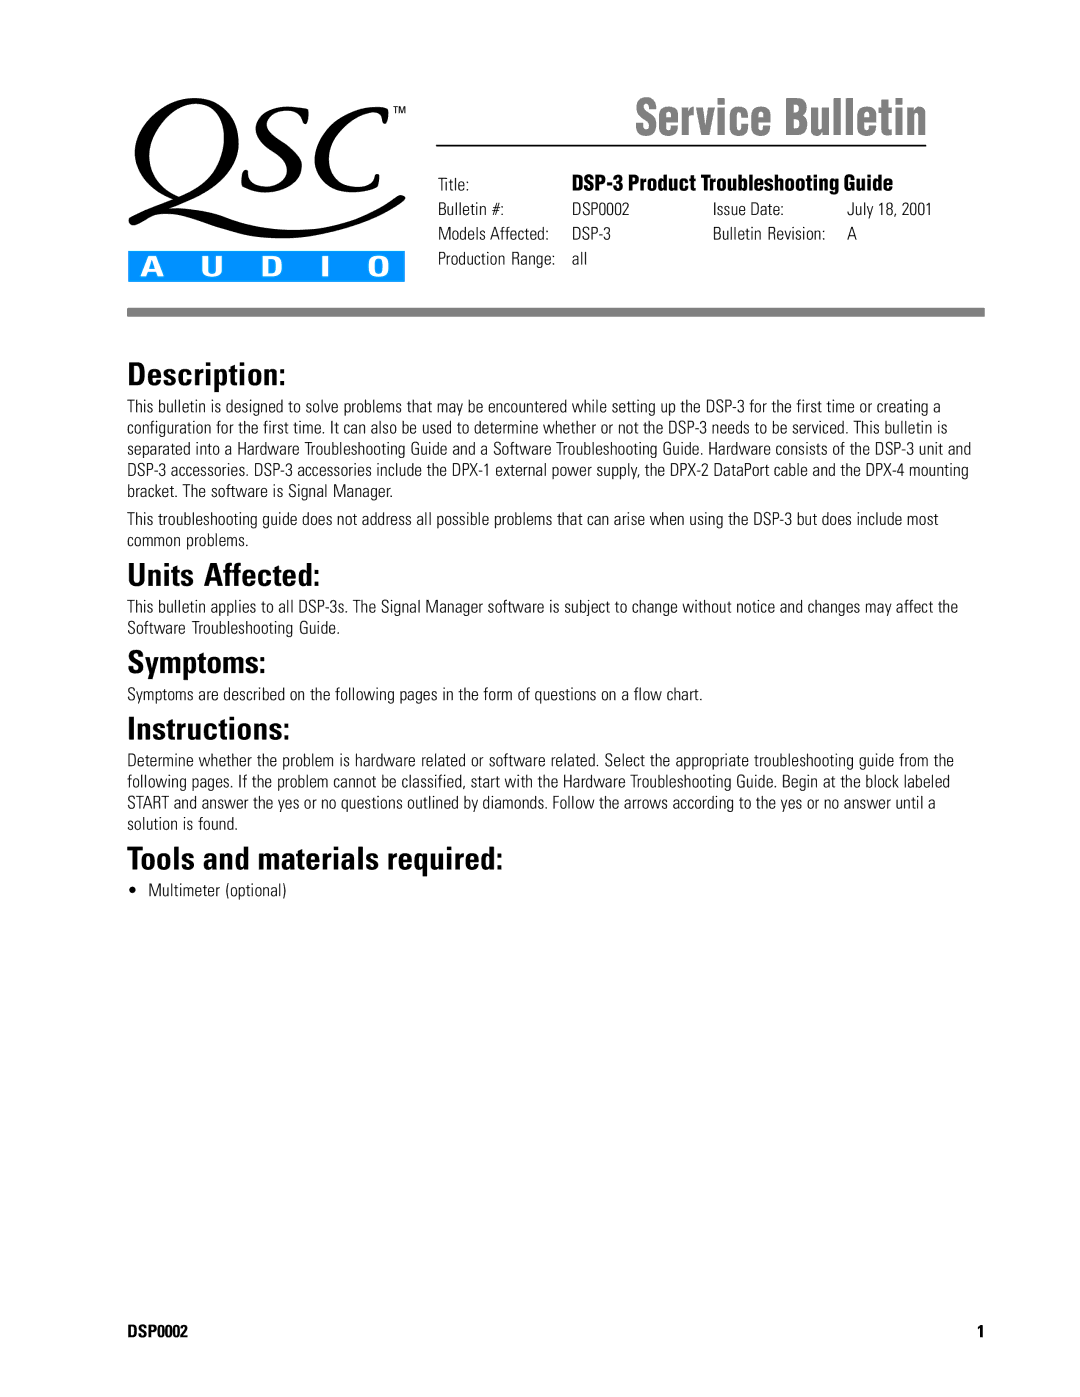 QSC Audio DSP0002 manual Service Bulletin, TitleDSP-3 Product Troubleshooting Guide 